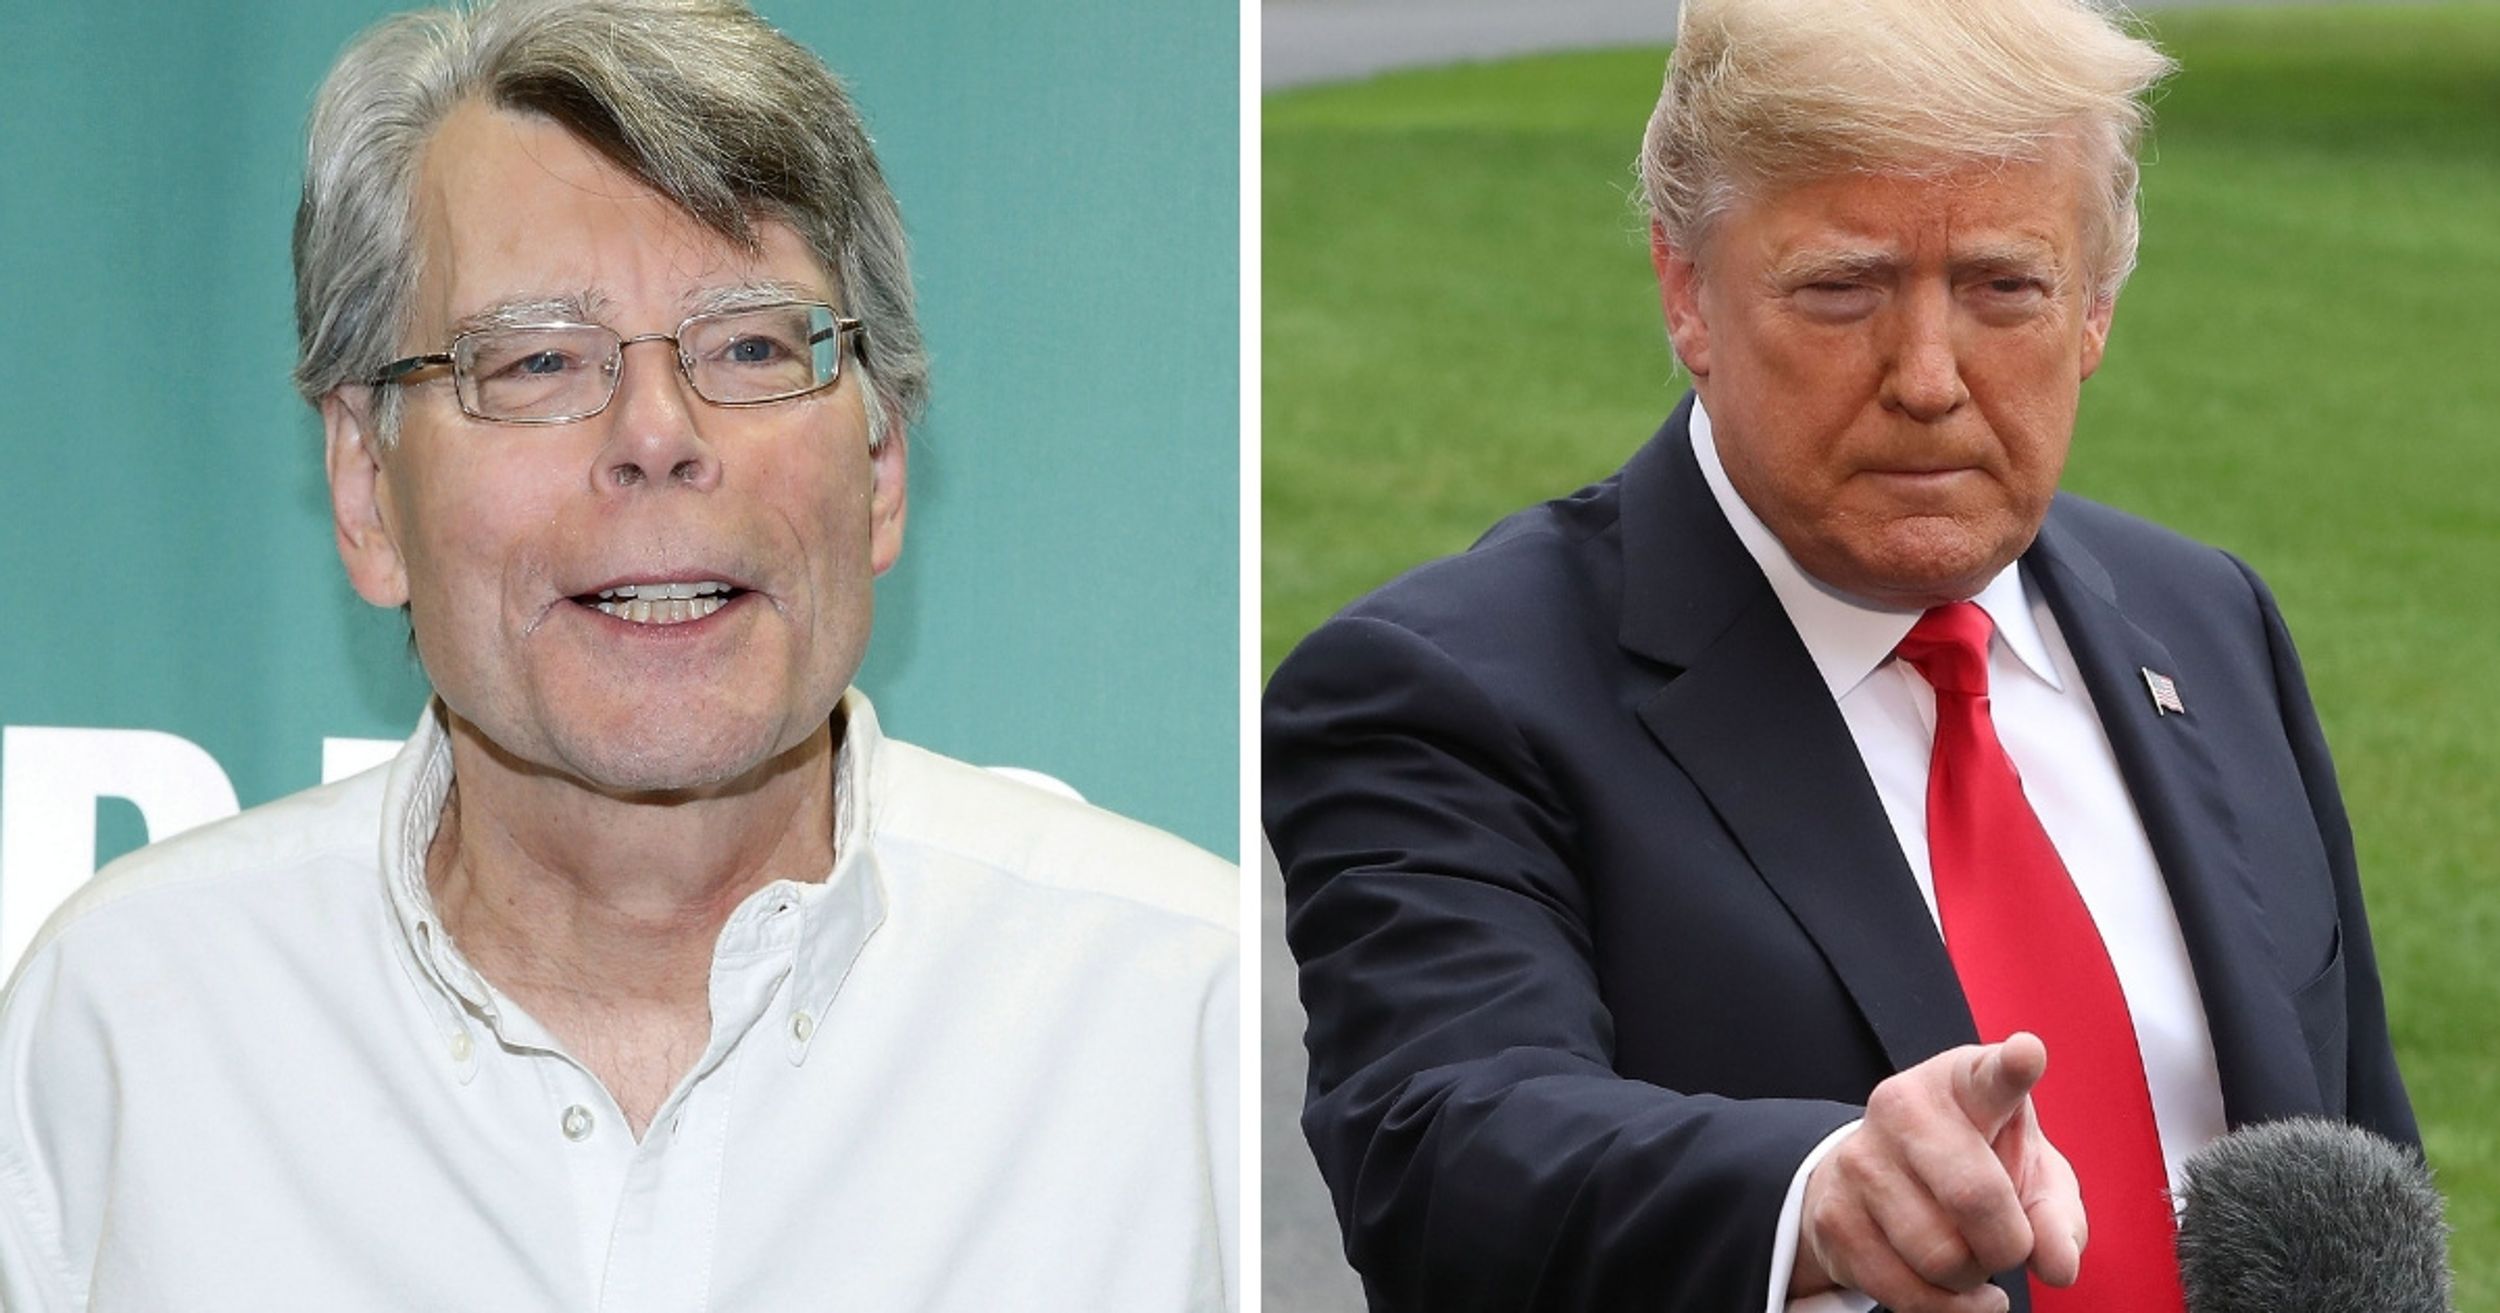 Stephen King Fires Back At Trump's Latest Rant Claiming There's An 'Onslaught Of Illegal Aliens'